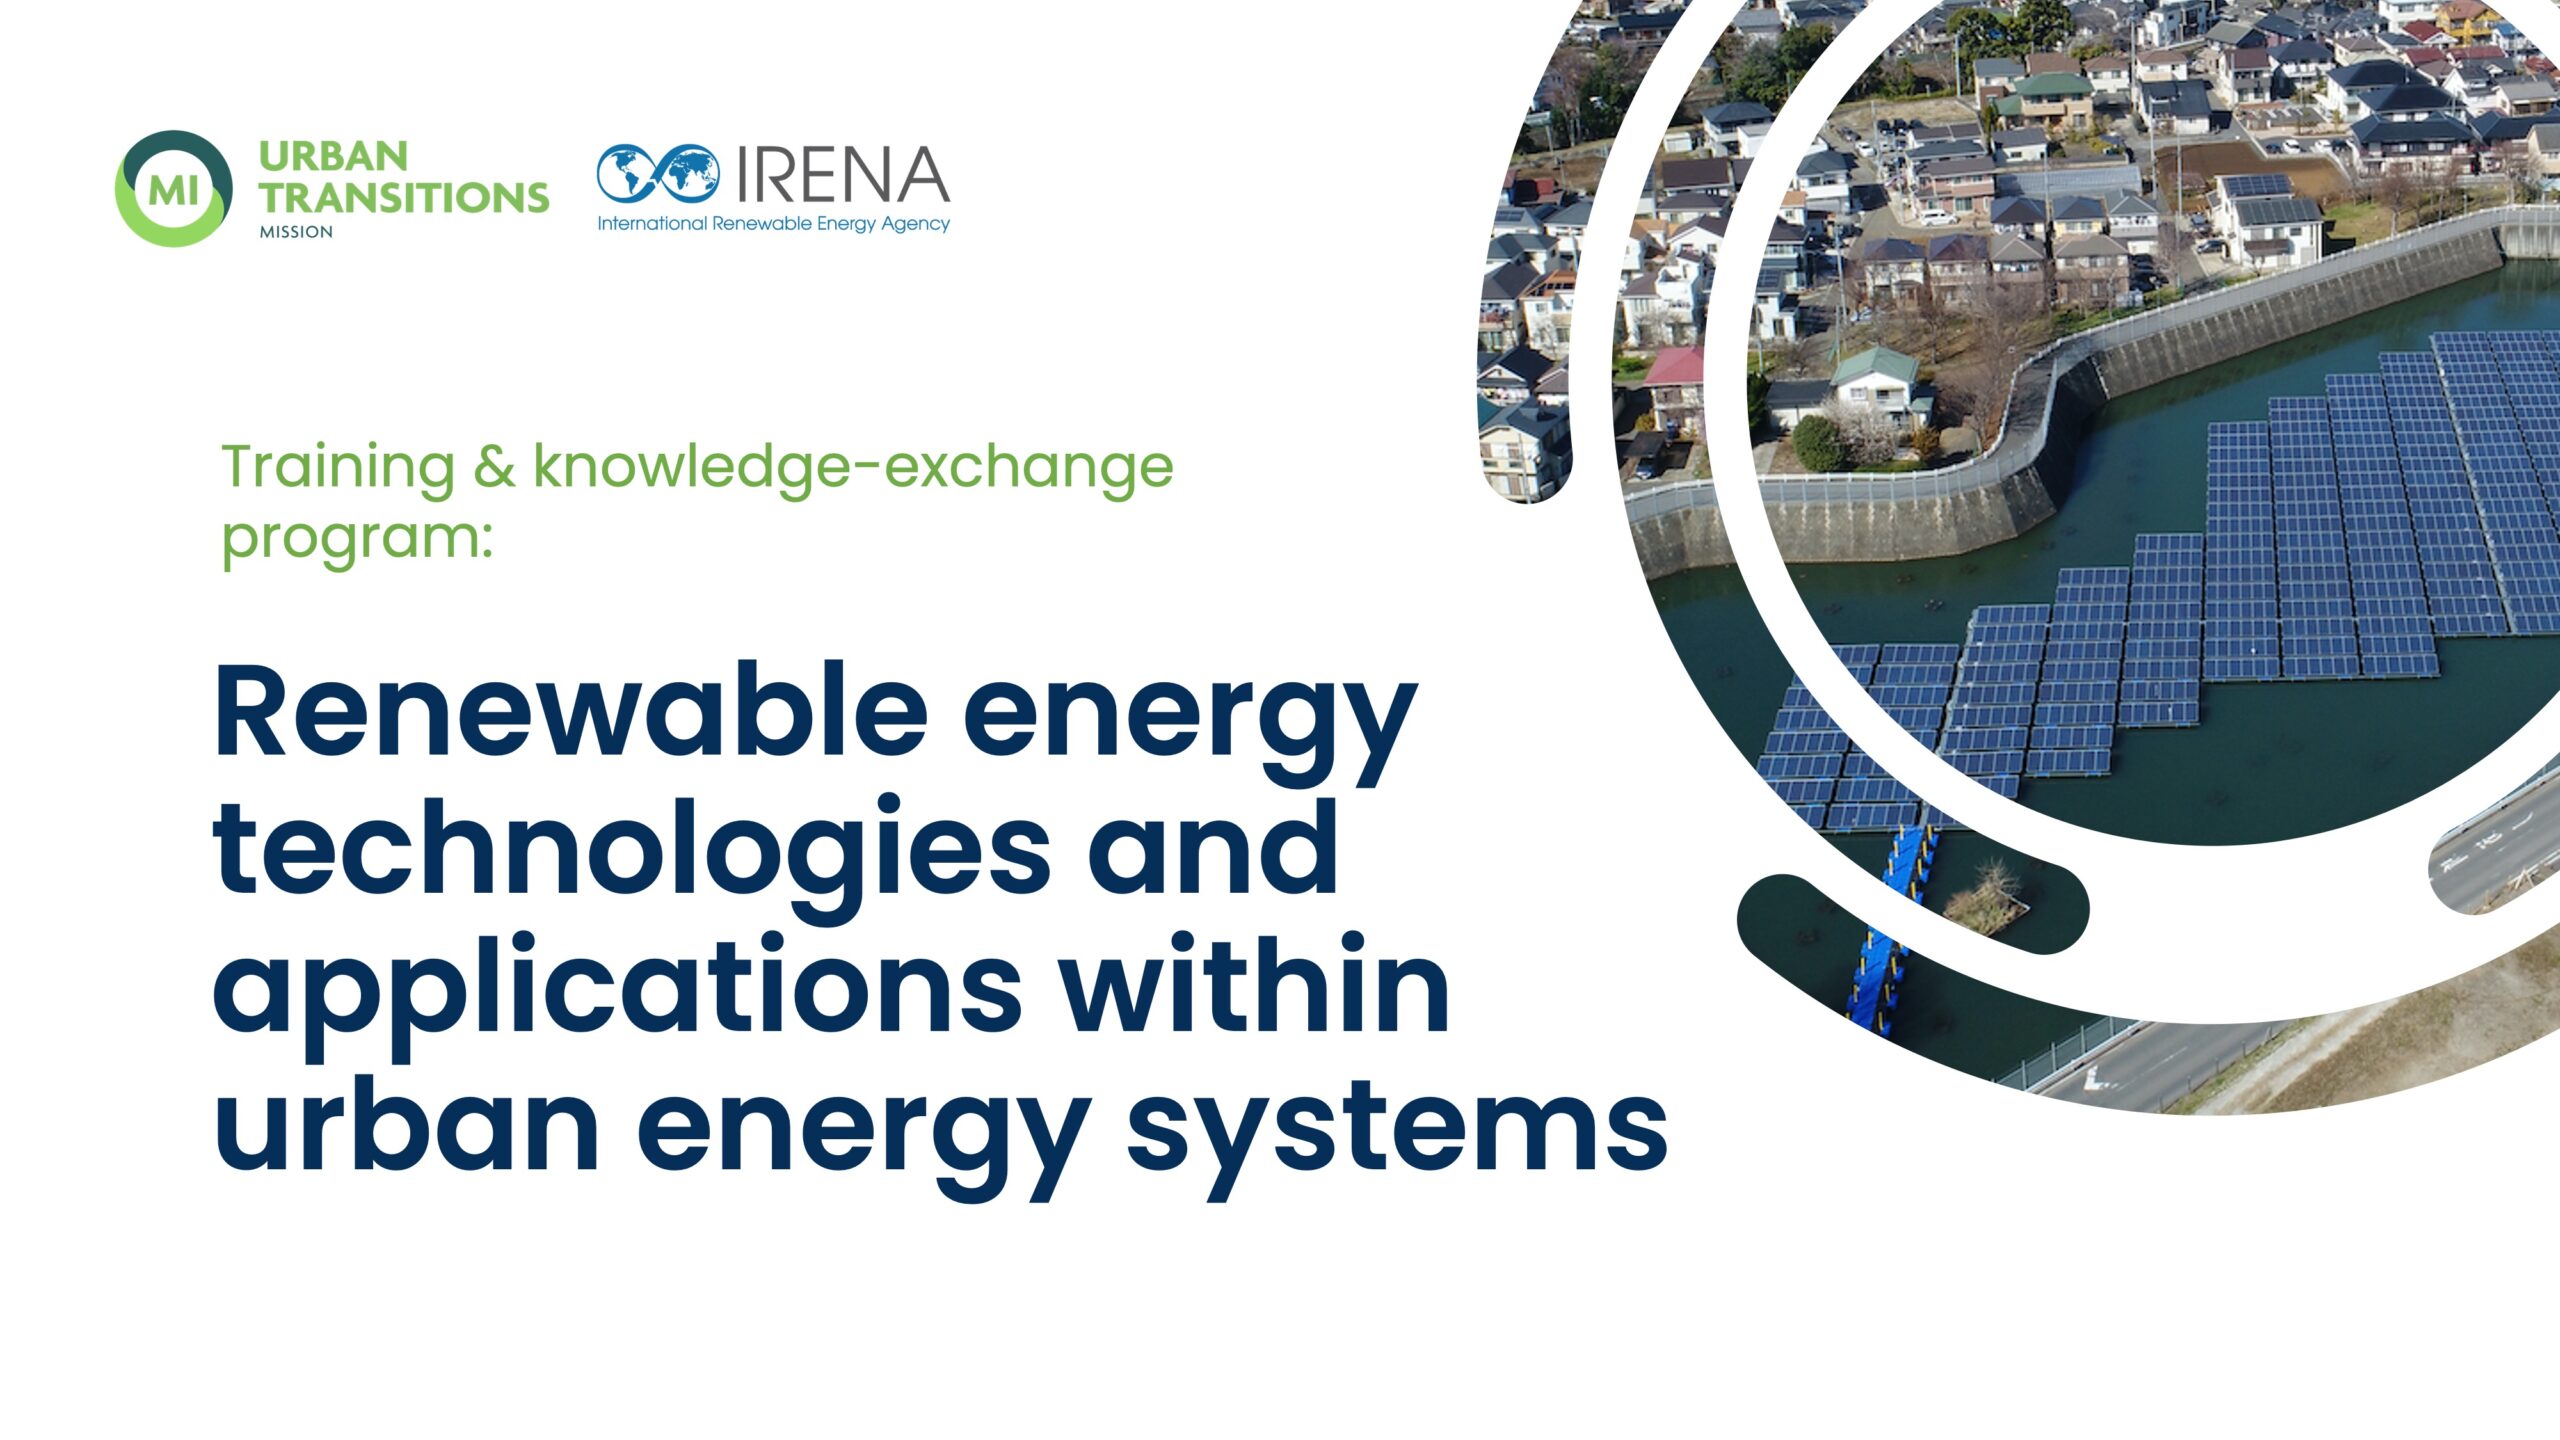 UTM teams up with IRENA to deliver 9 trainings on renewable energy technologies for cities